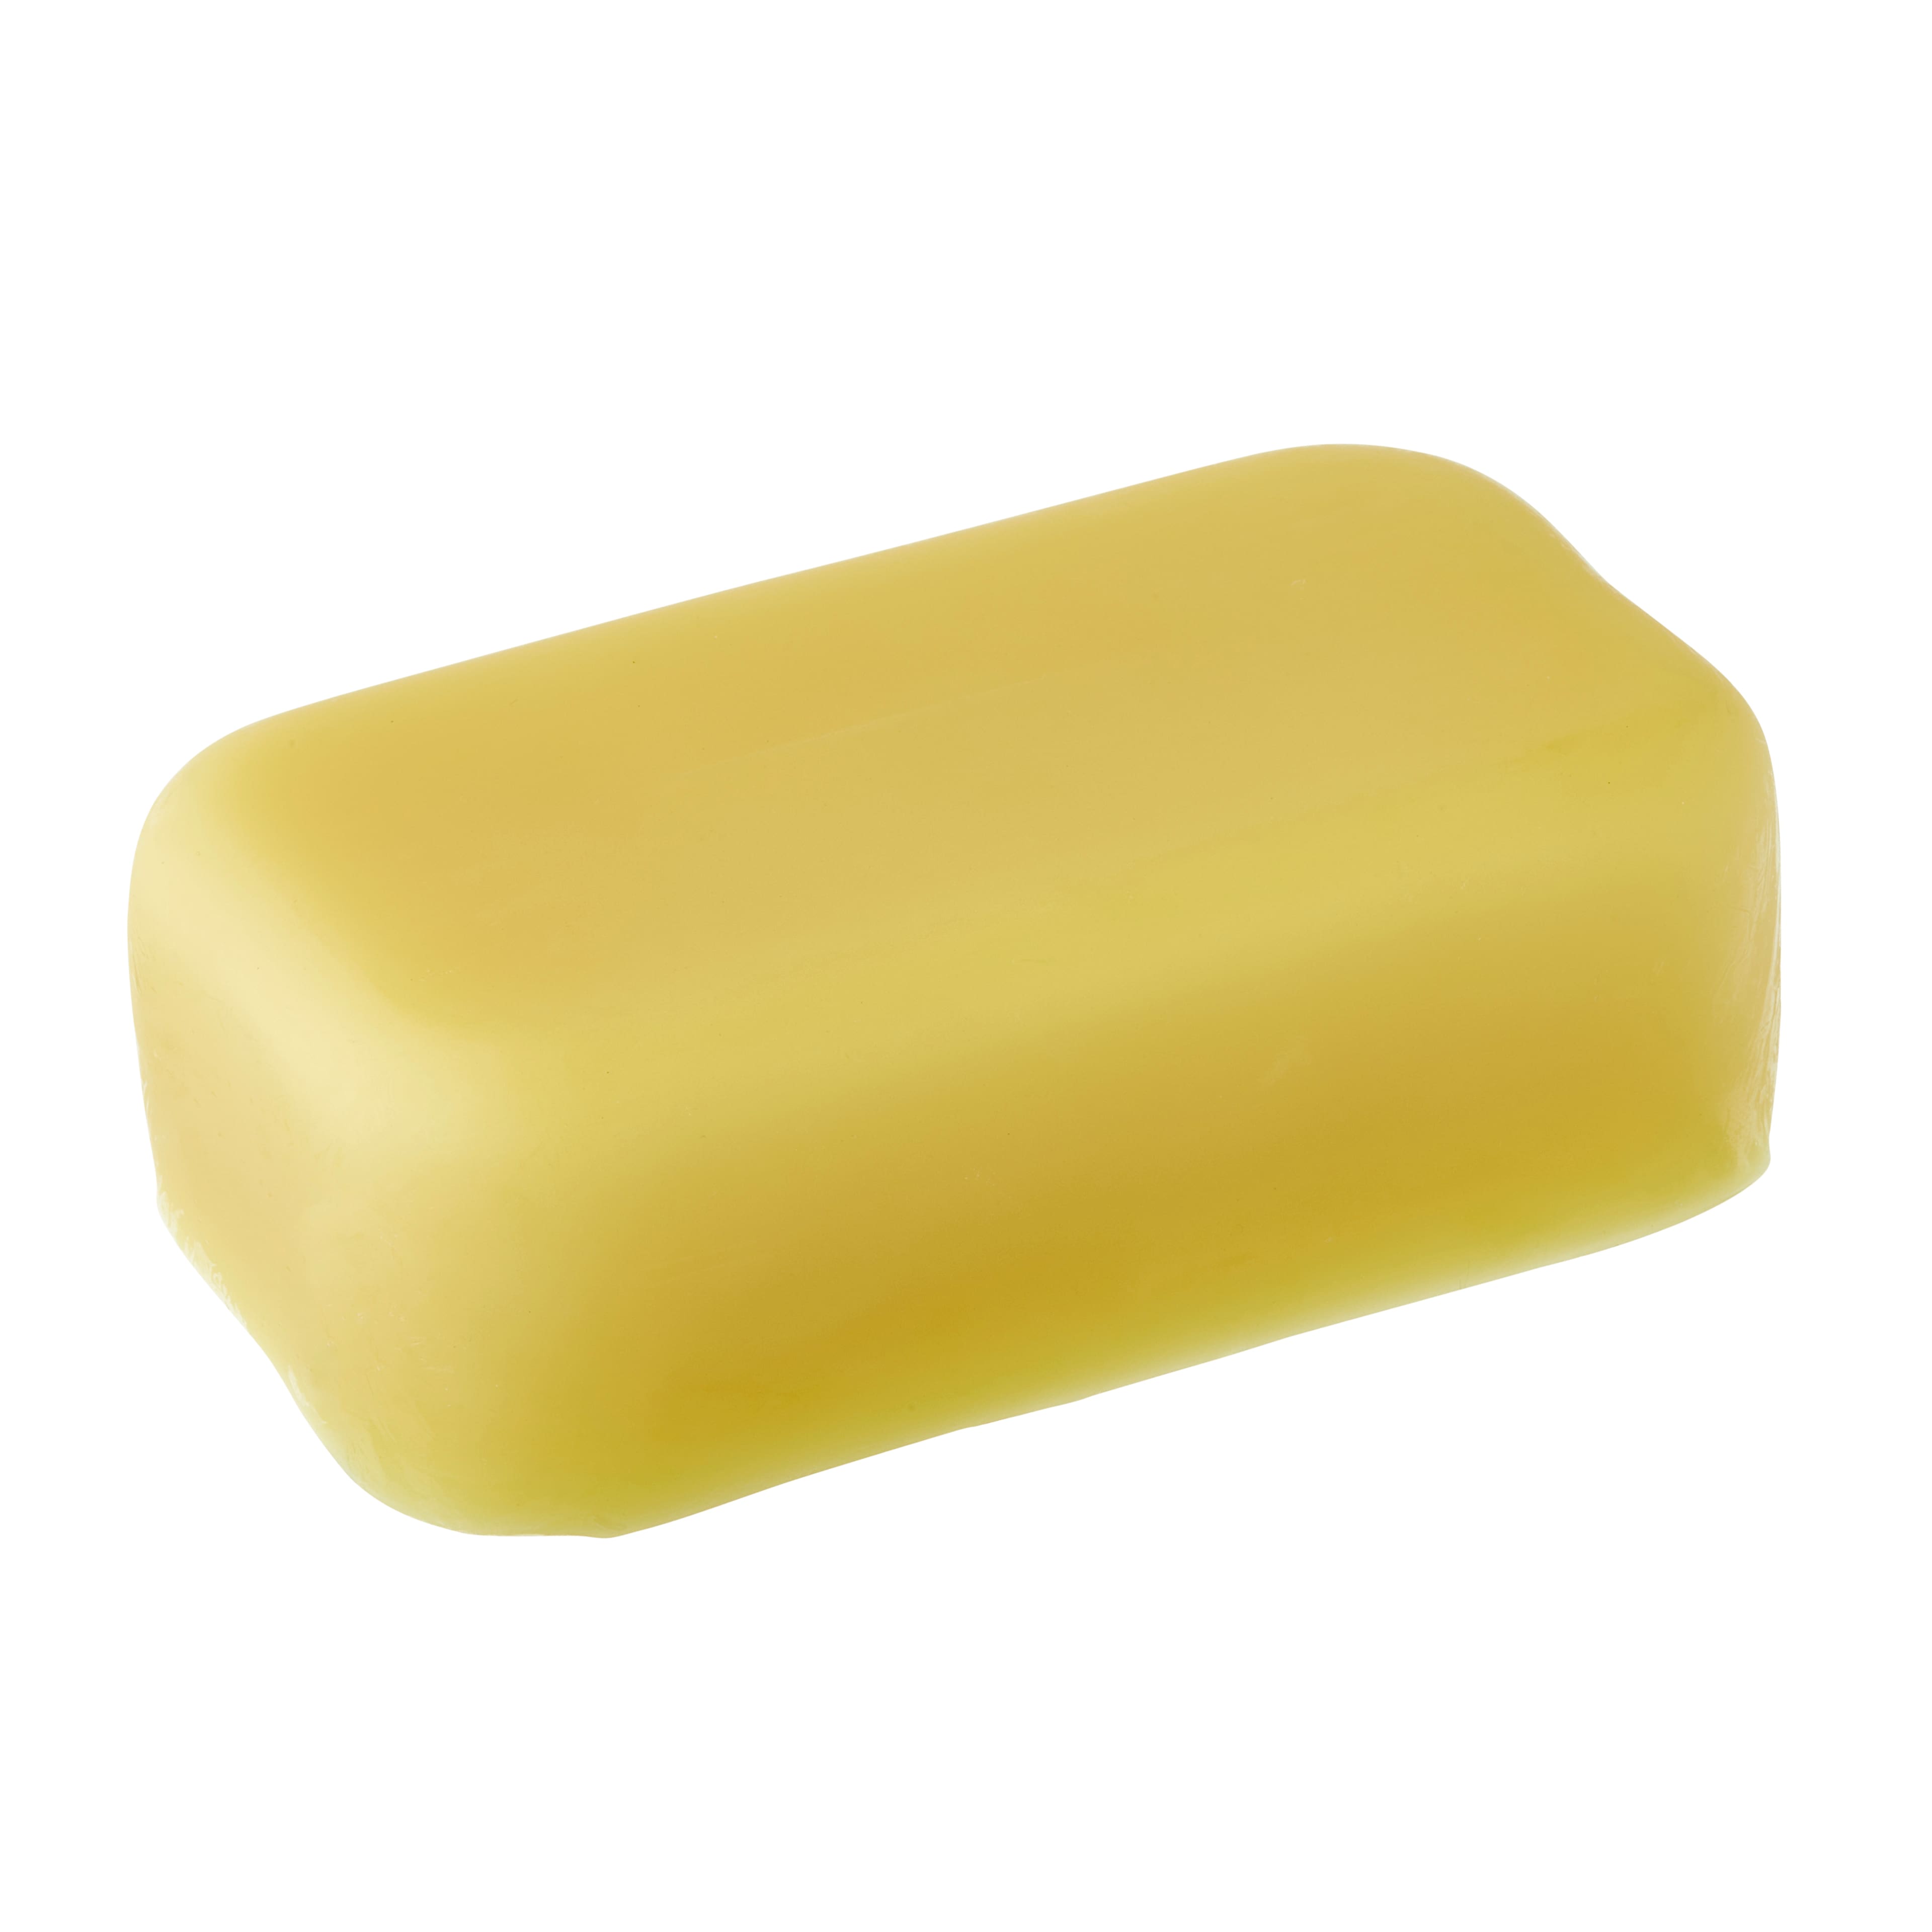 Beeswax Block Organic Yellow (USA) for Cosmetics, Soaps, and Candles